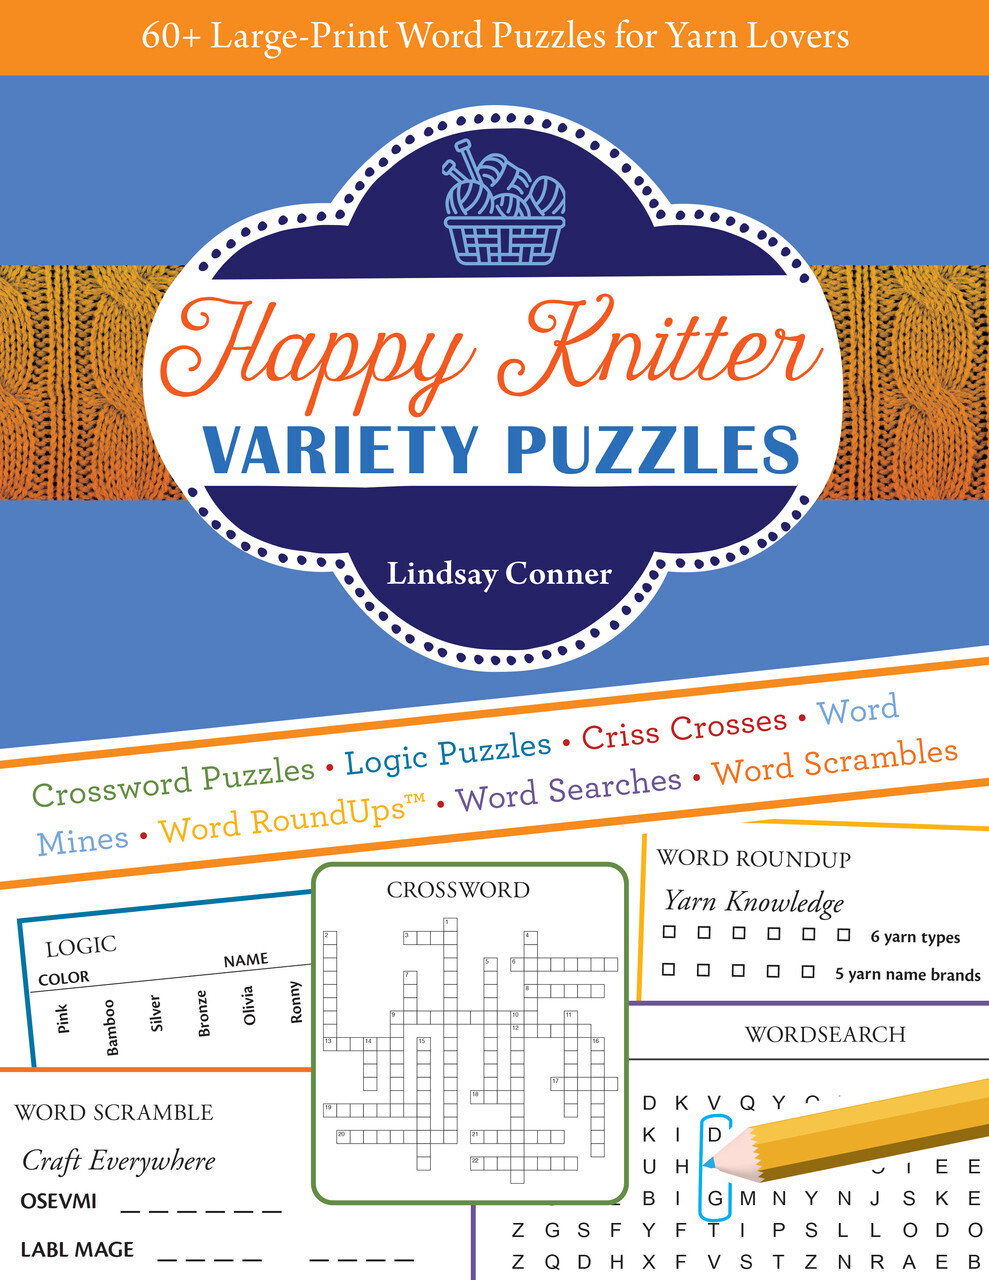 Happy Knitter Variety Puzzles - By Lindsay Conner